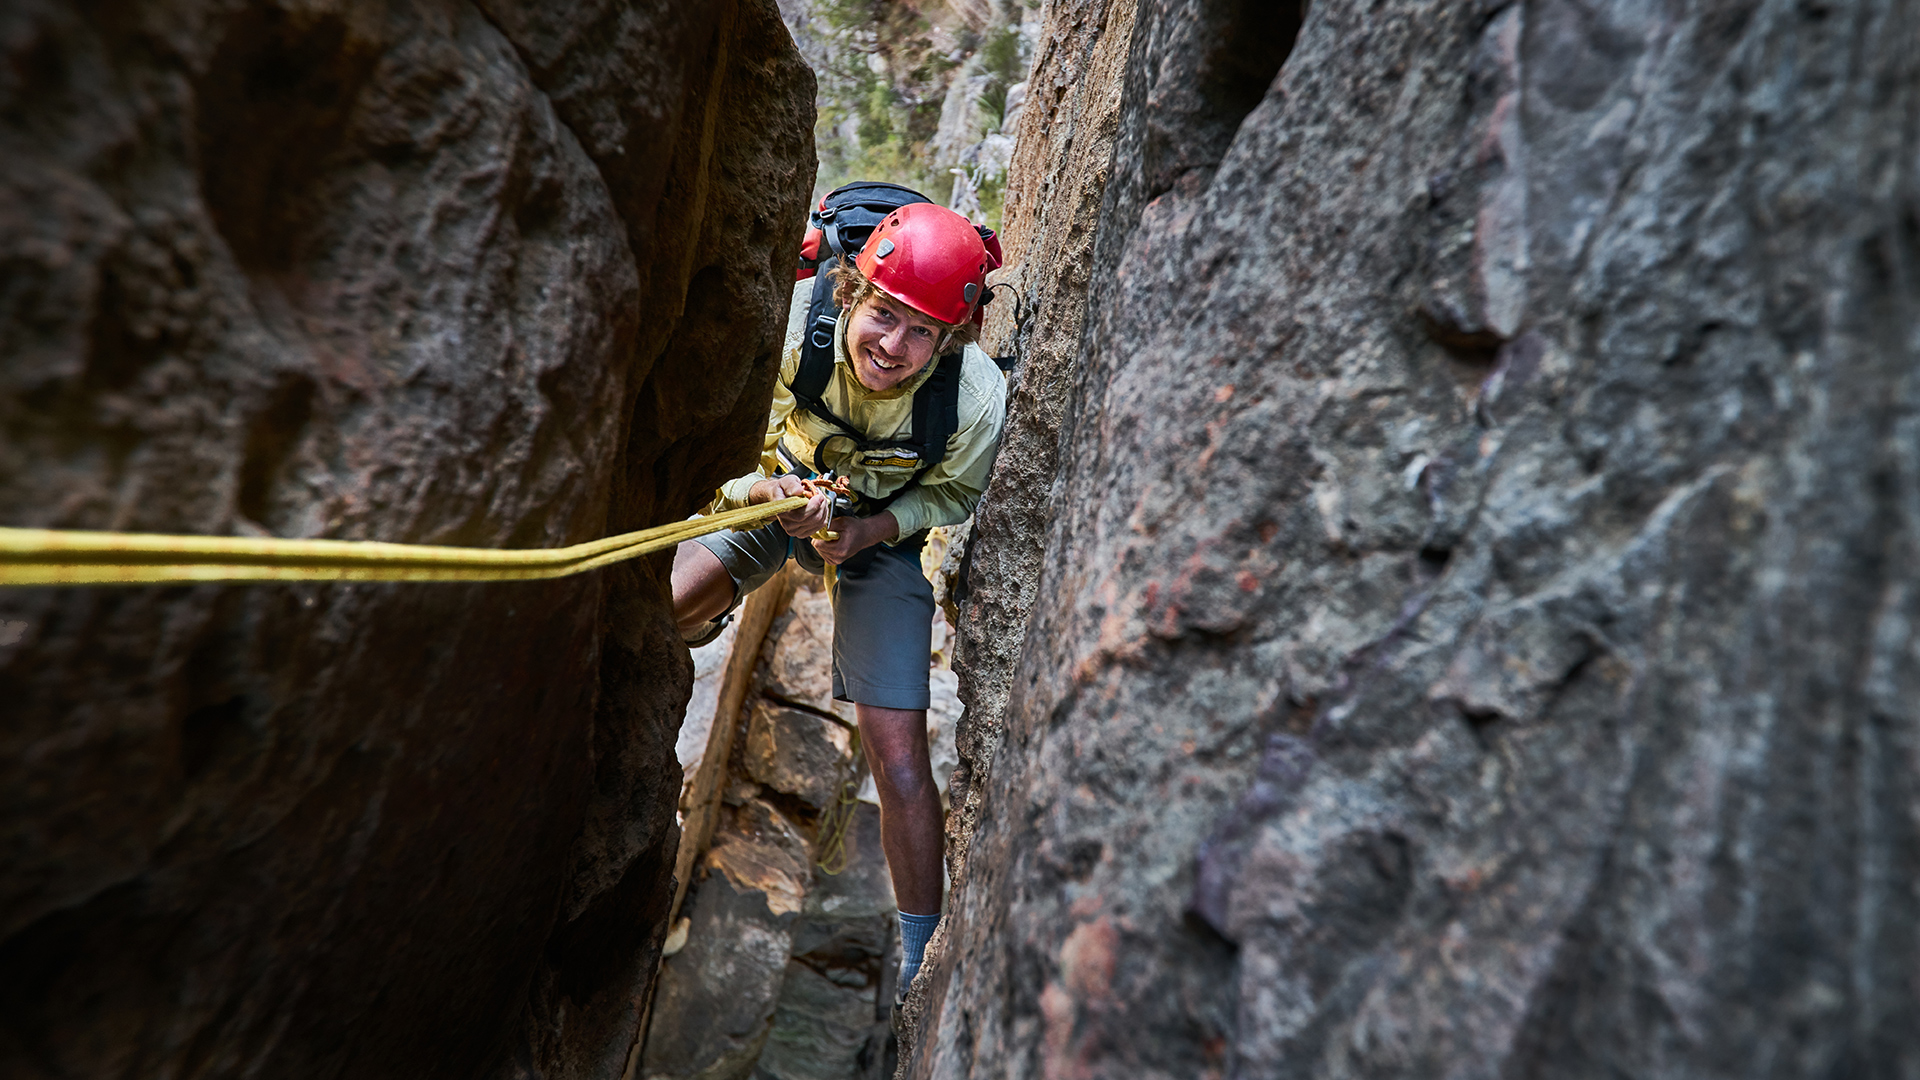 Full Day Multi-Pitch Abseiling Adventure With Lunch